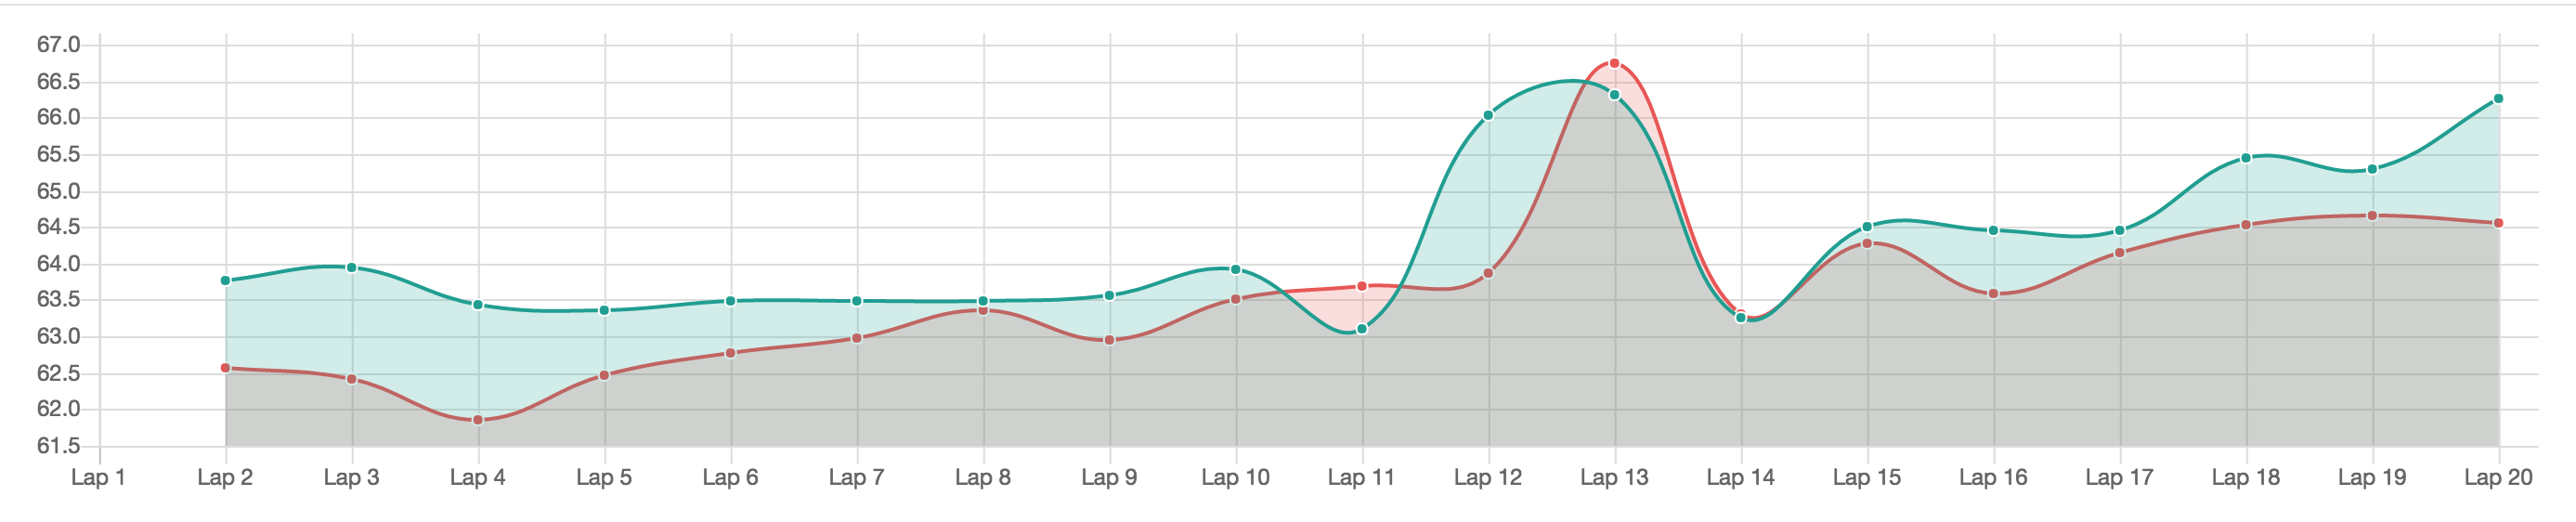 Roczen-Red, Dungey-Green: Lap Time Comparison from Main Event